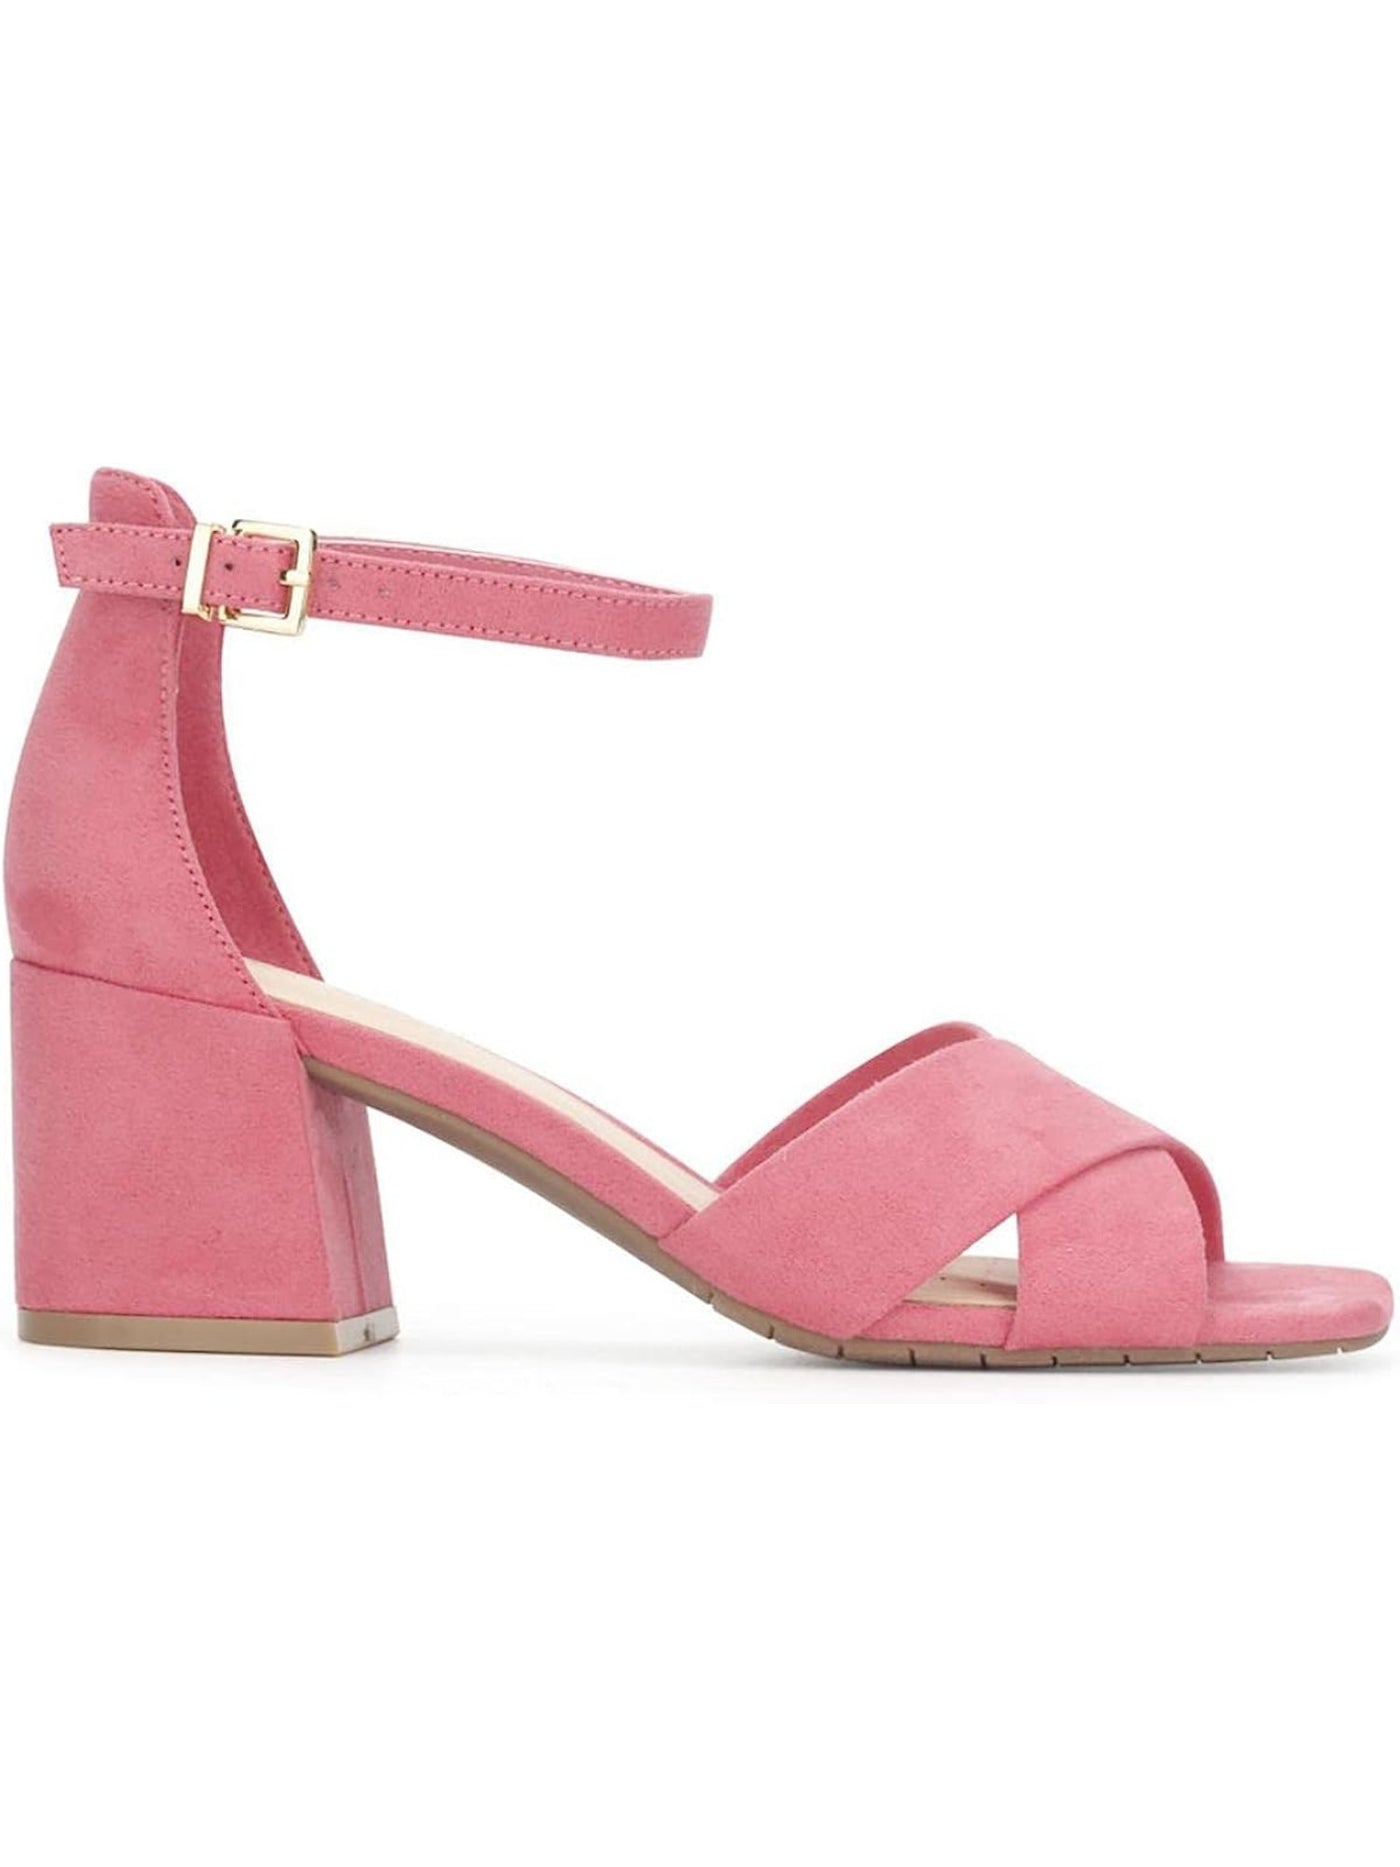 REACTION KENNETH COLE Womens Pink Ankle Strap Padded Mix X-band Square Toe Block Heel Buckle Dress Heeled Sandal 8.5